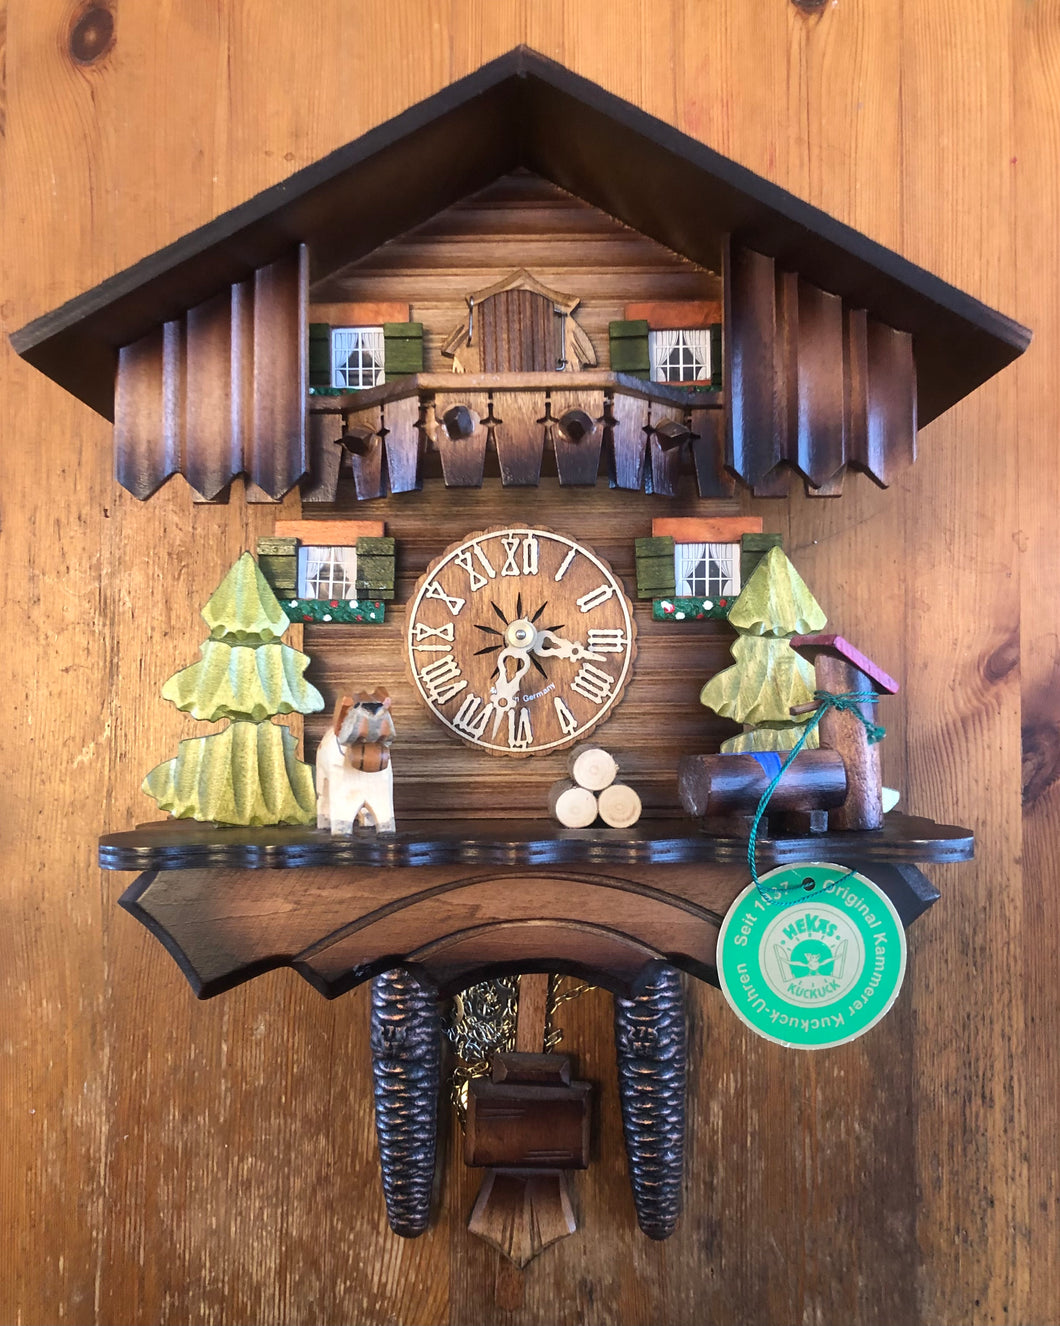 VINTAGE - Hekas Chalet Cuckoo Clock with Rescue Dog